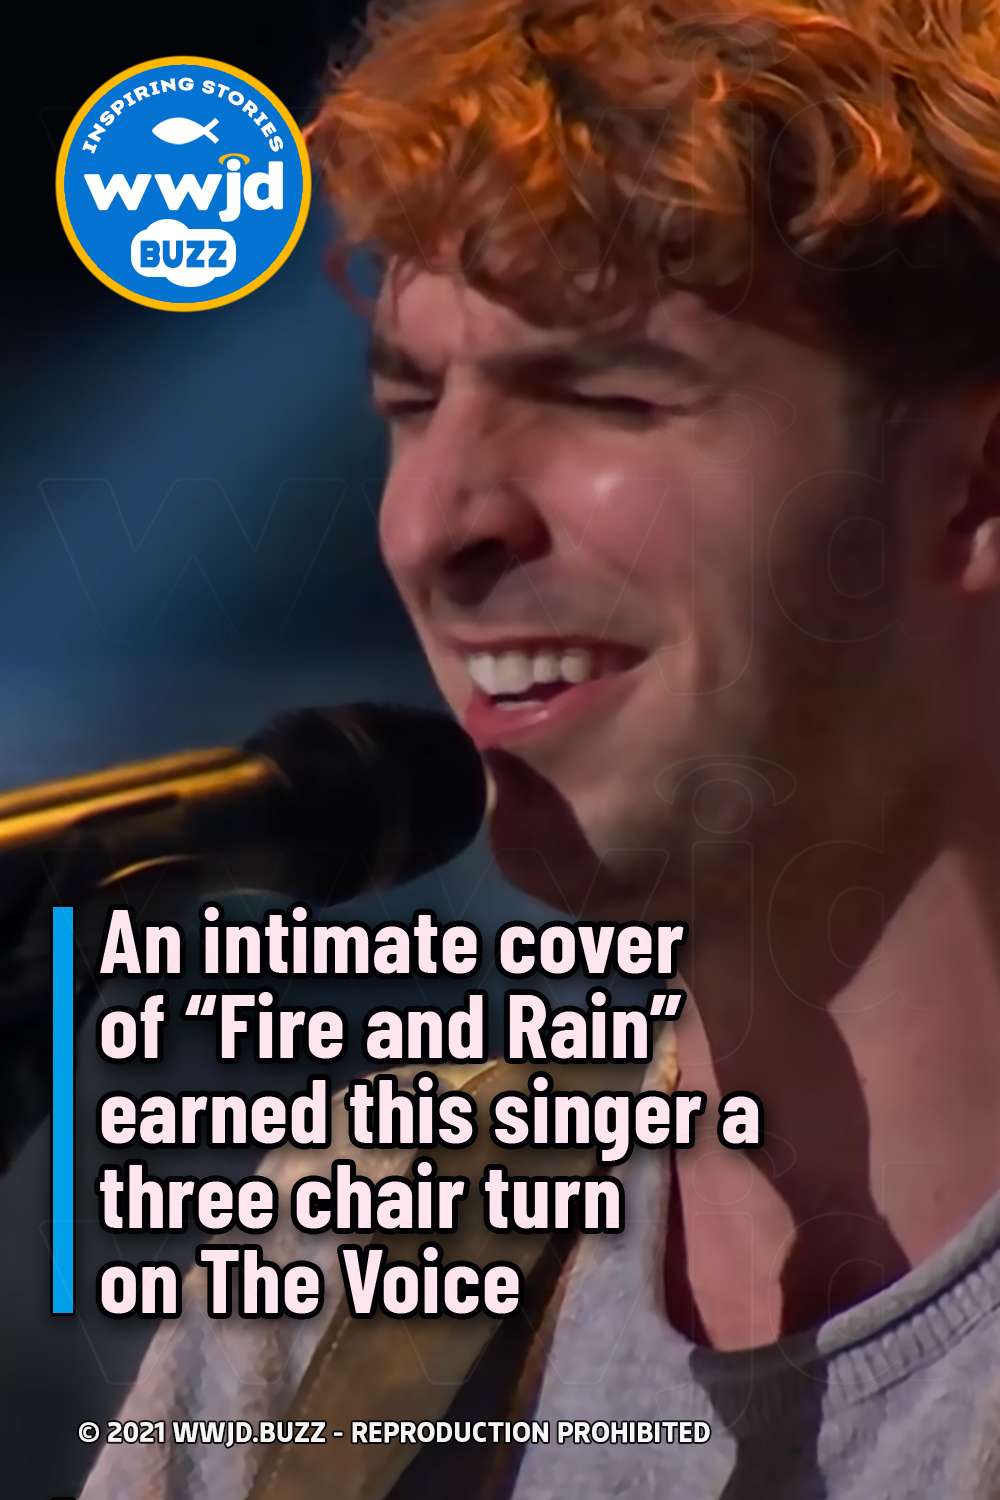 An intimate cover of “Fire and Rain” earned this singer a three chair turn on The Voice